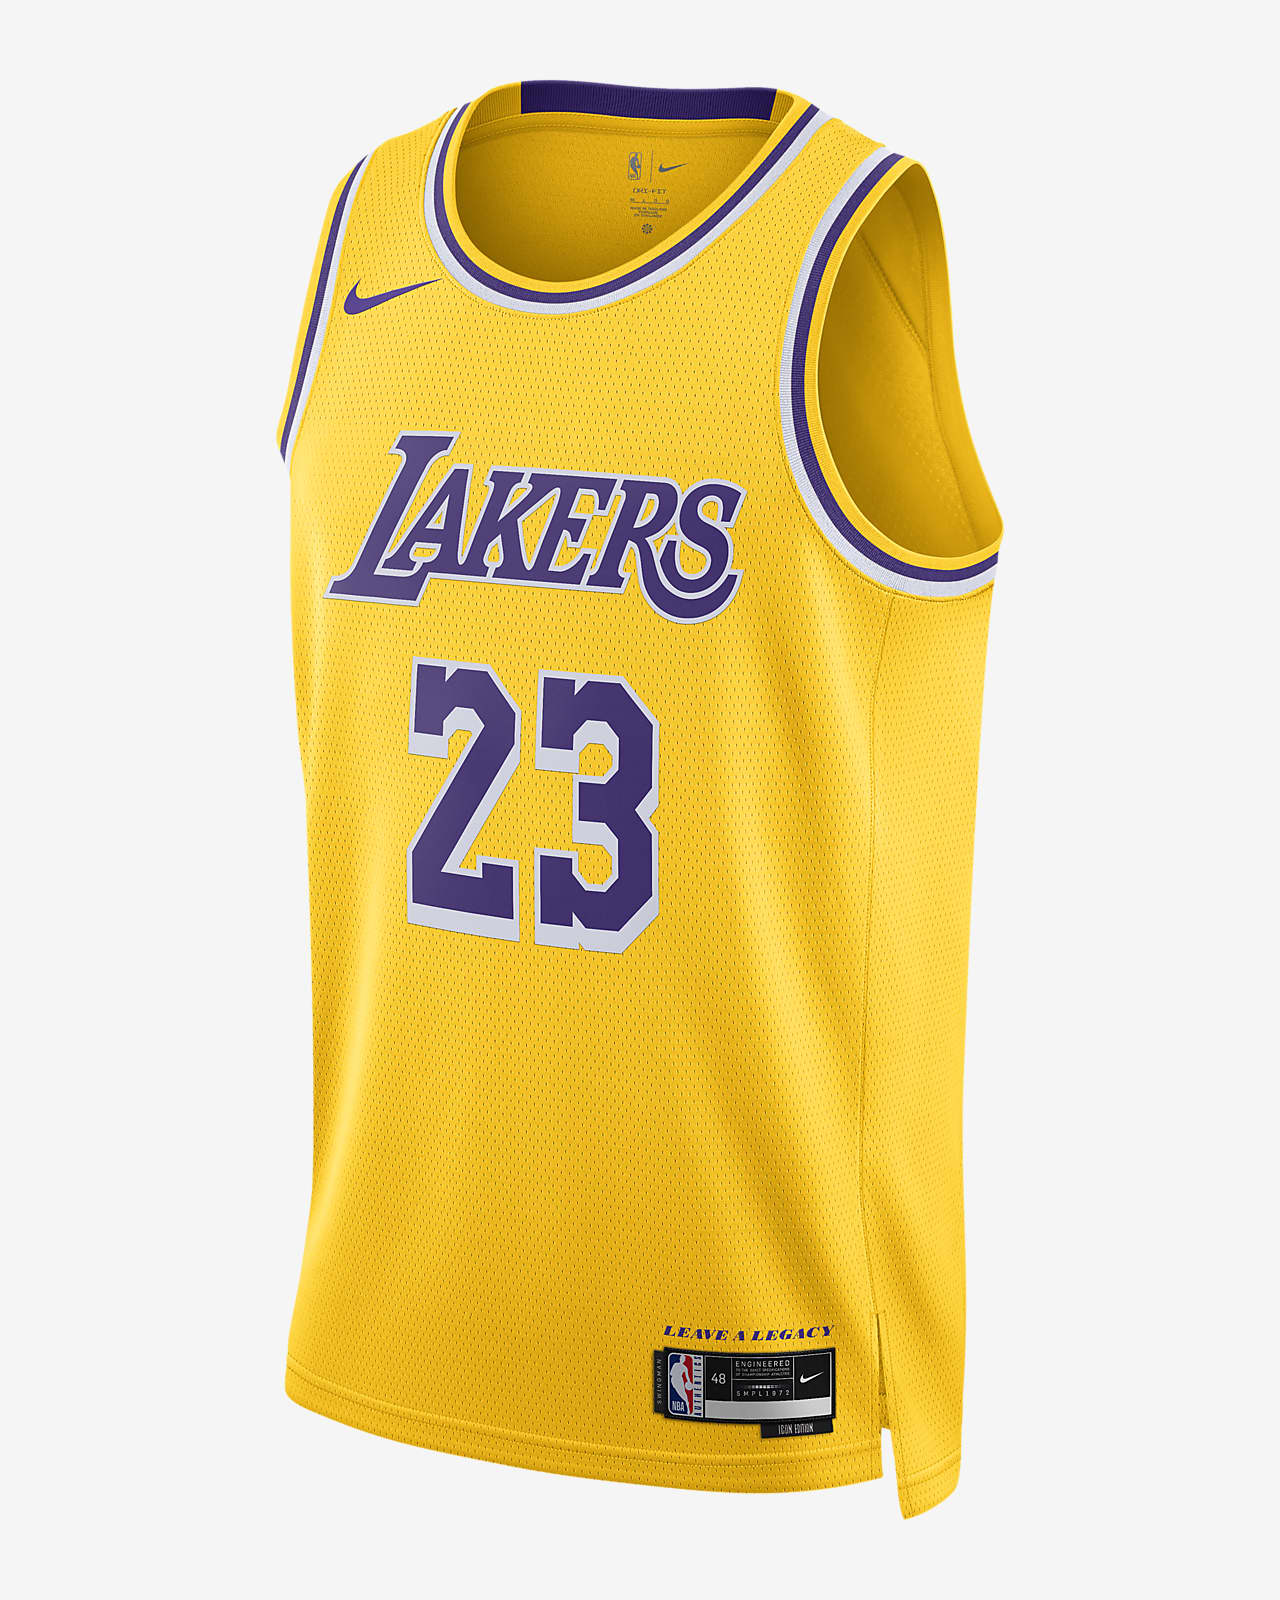 https://static.nike.com/a/images/t_PDP_1280_v1/f_auto,q_auto:eco/d9aa1b6a-4385-4233-96b6-b03f5c83d1a6/los-angeles-lakers-icon-edition-2022-23-mens-dri-fit-nba-swingman-jersey-WGBhtS.png